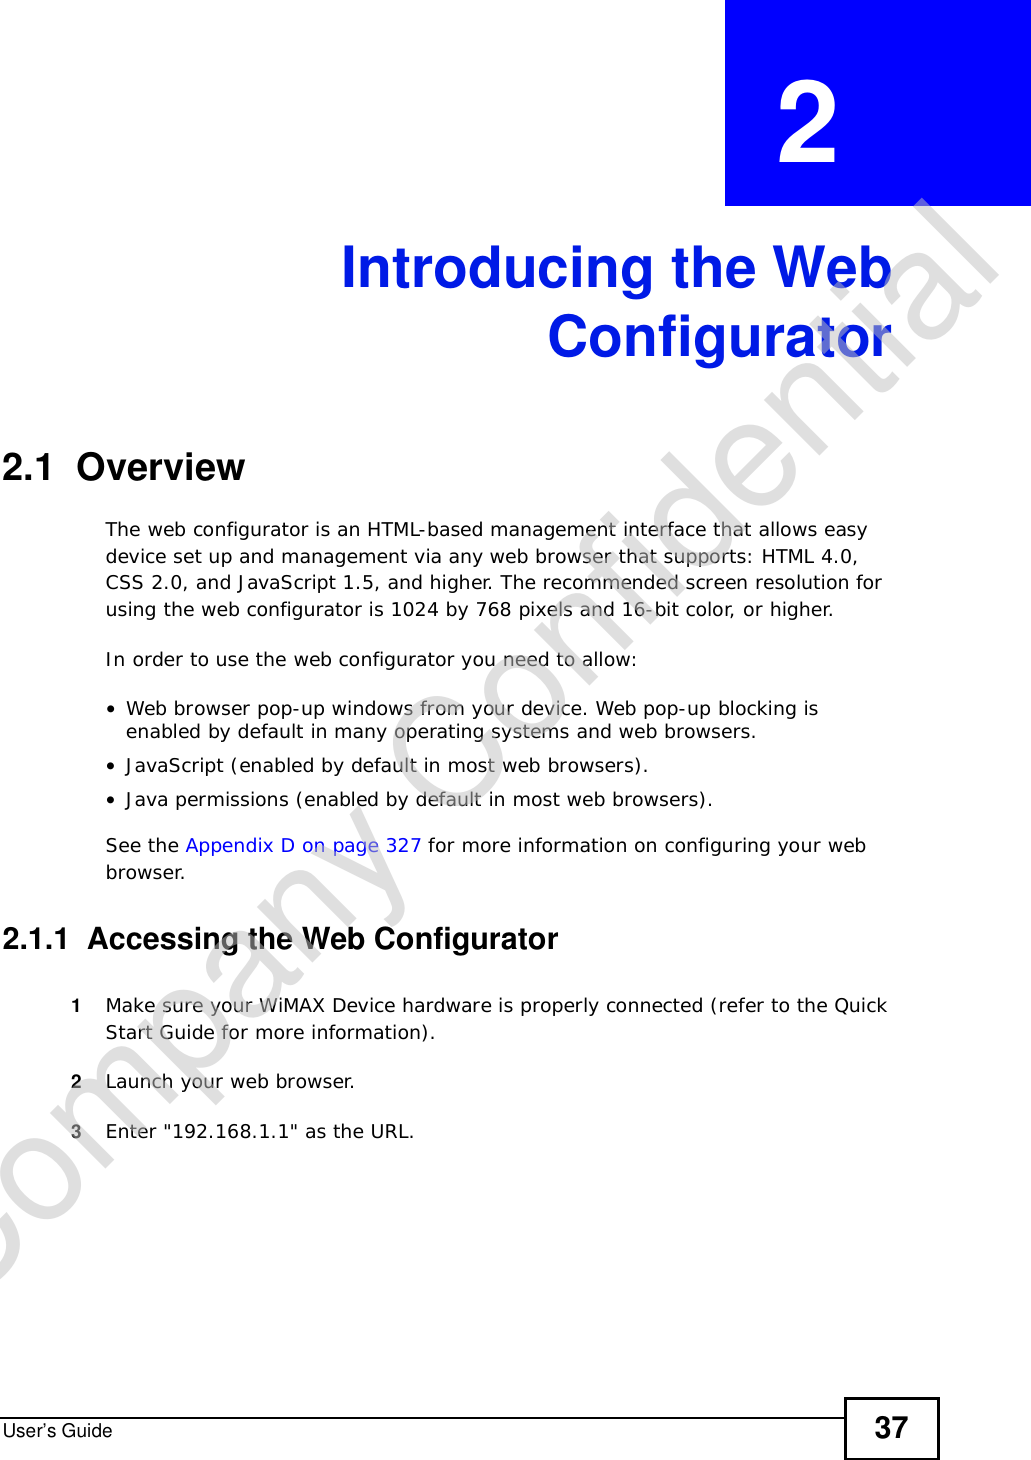 User’s Guide 37CHAPTER  2 Introducing the WebConfigurator2.1  OverviewThe web configurator is an HTML-based management interface that allows easy device set up and management via any web browser that supports: HTML 4.0, CSS 2.0, and JavaScript 1.5, and higher. The recommended screen resolution for using the web configurator is 1024 by 768 pixels and 16-bit color, or higher.In order to use the web configurator you need to allow:•Web browser pop-up windows from your device. Web pop-up blocking is enabled by default in many operating systems and web browsers.•JavaScript (enabled by default in most web browsers).•Java permissions (enabled by default in most web browsers).See the Appendix D on page 327 for more information on configuring your web browser.2.1.1  Accessing the Web Configurator1Make sure your WiMAX Device hardware is properly connected (refer to the Quick Start Guide for more information).2Launch your web browser.3Enter &quot;192.168.1.1&quot; as the URL.Company Confidential